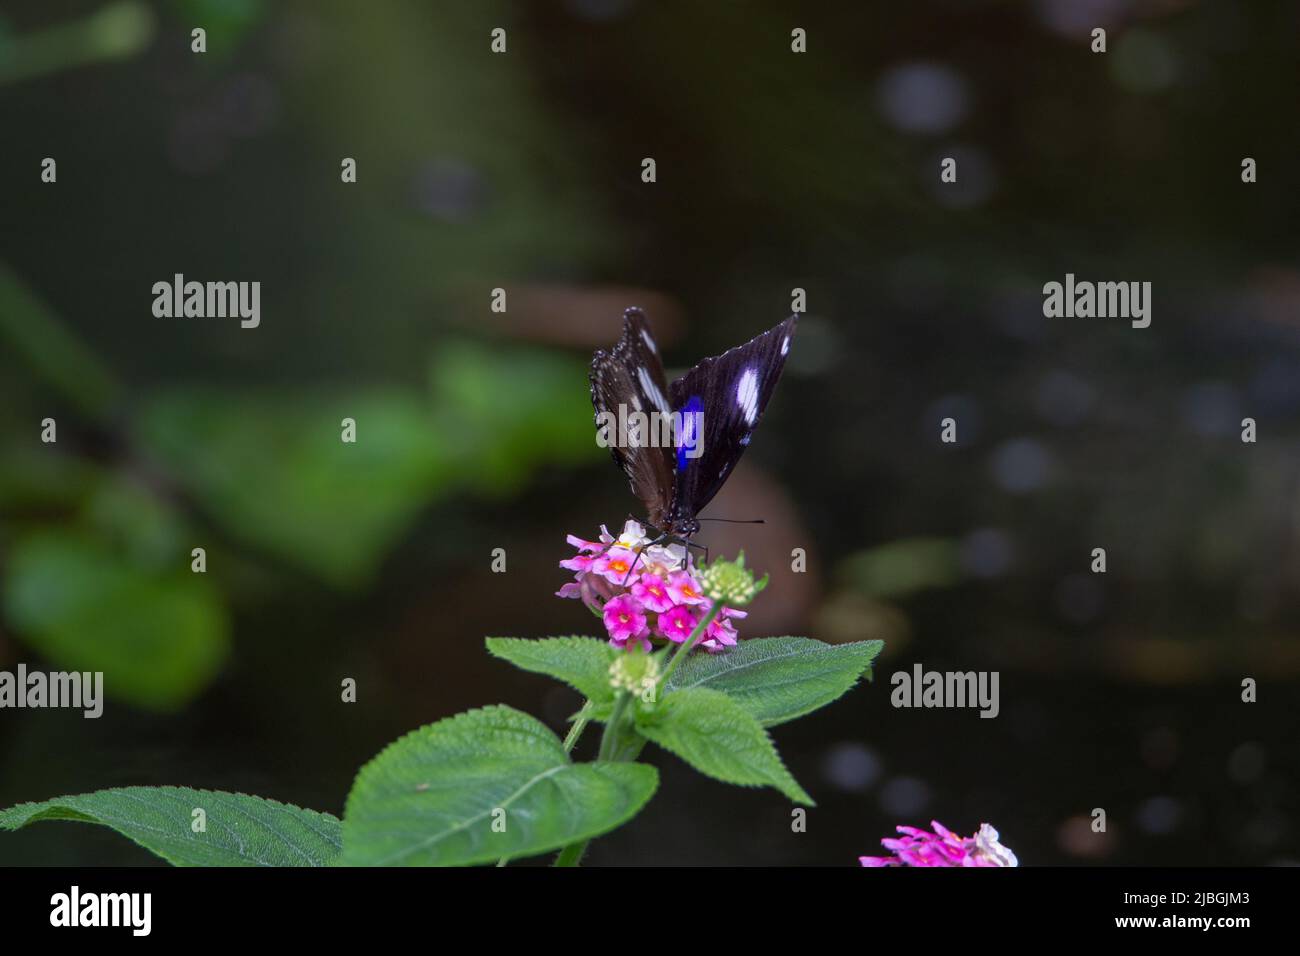 Blue moon butterfly (Hypolimnas bolina) with  wings open feeding from a pink and yellow flower isolated with tropical dark green leaves Stock Photo